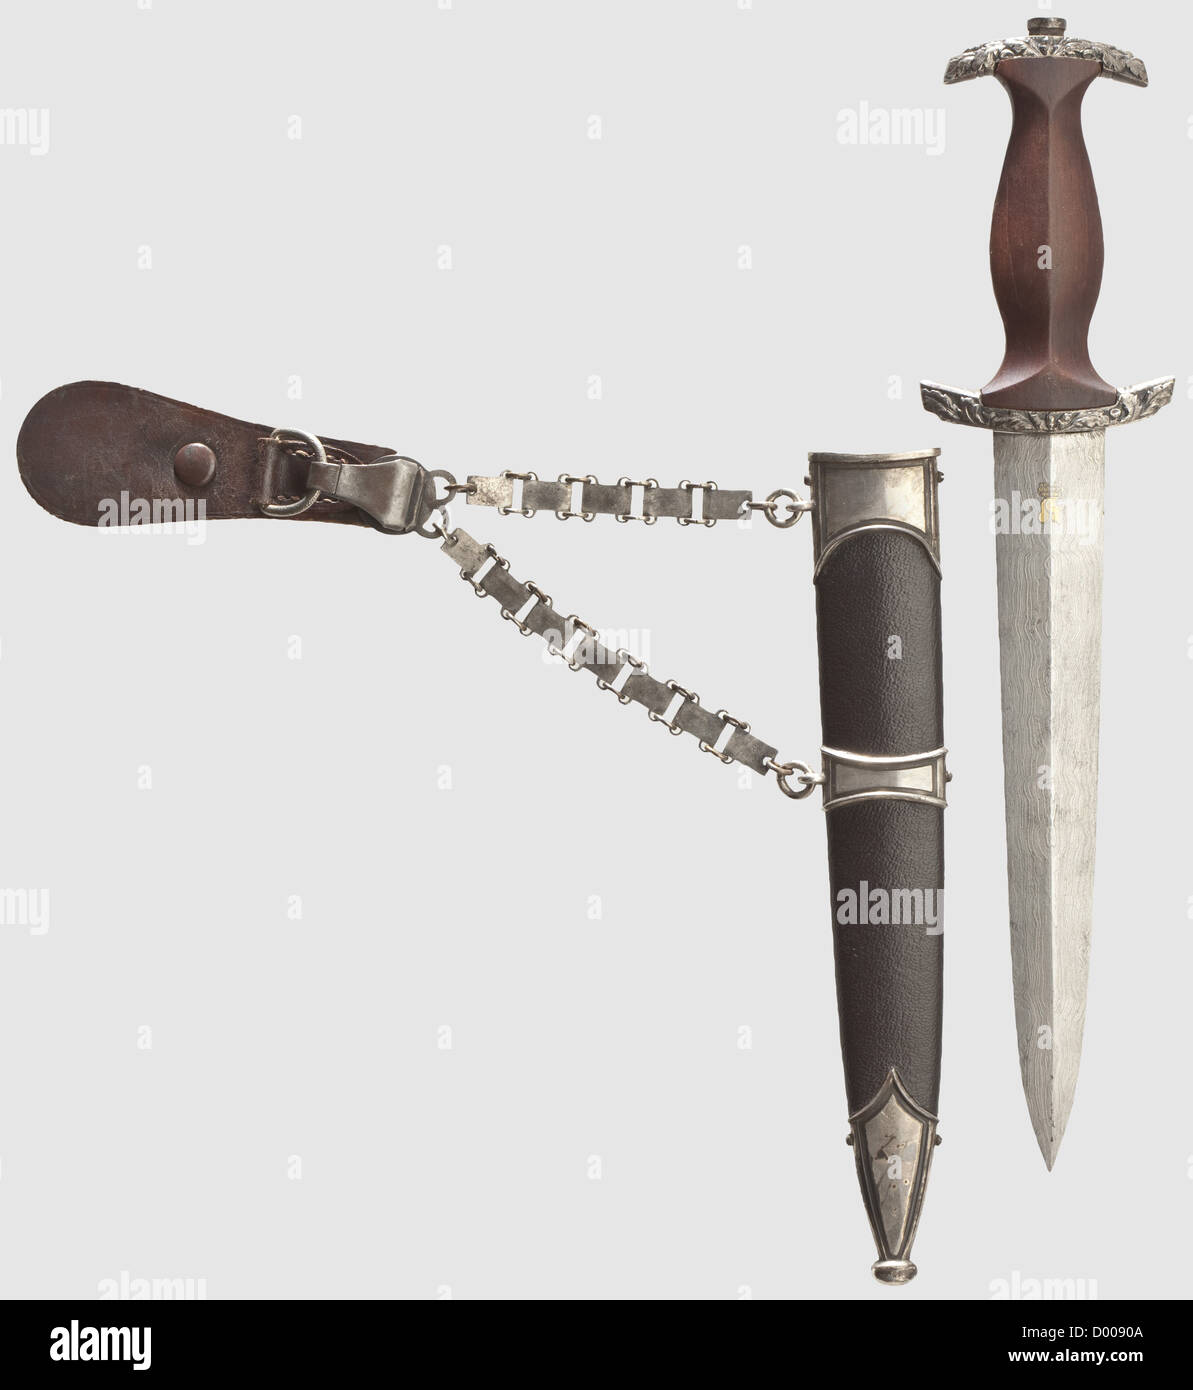 An SA high leader's honour dagger model 1938 with chain hanger,Maker Eickhorn,Solingen Damascus blade with raised,gilt motto 'Alles für Deutschland' between oak leaf branches,maker's mark 'Original Eickhorn Solingen',struck 'D' in the tang.Silver cross guard with oak leaf décor in relief,brown wooden grip with applied fine zinc eagle and enamelled SA medallion.The scabbard newly leather-covered.Iron chain hanger with engraved,silvered fittings,the central one in variant issue.Length 34.5 cm.These daggers were bestowed by Viktor Lutze upon deserving,Additional-Rights-Clearences-Not Available Stock Photo